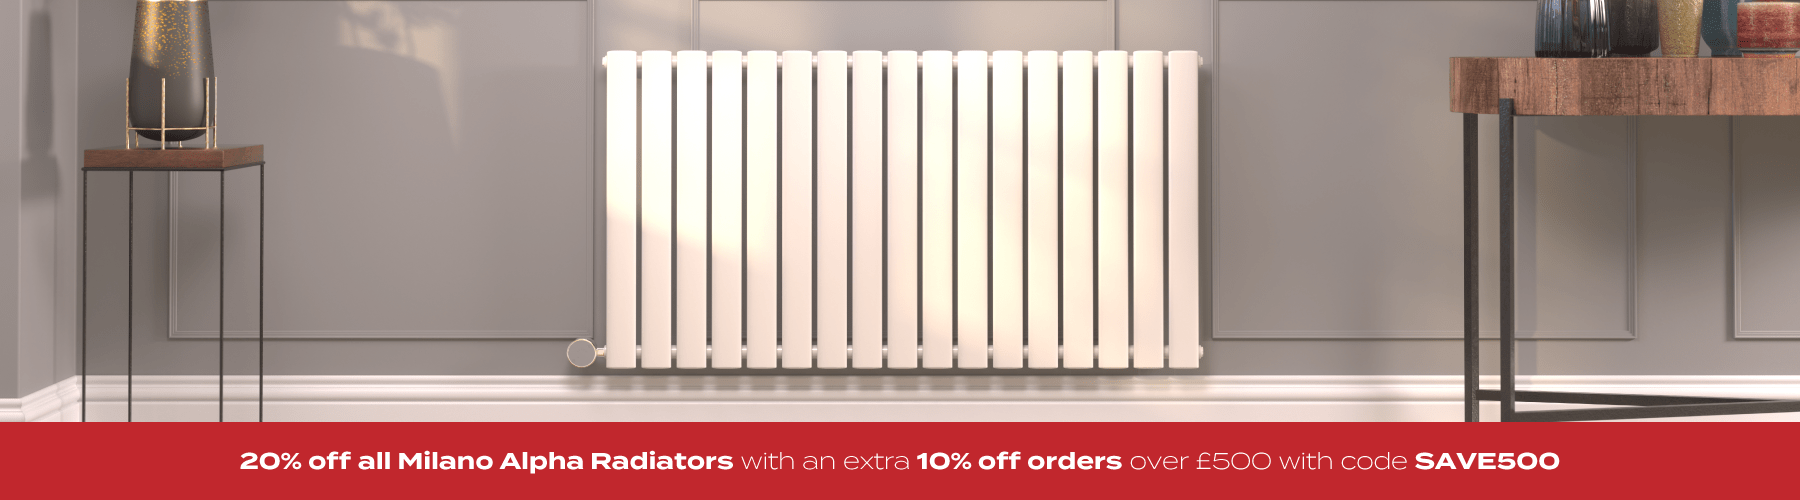  20% off All Milano Alpha Radiators with an extra 10% off orders over £500 with code SAVE500 